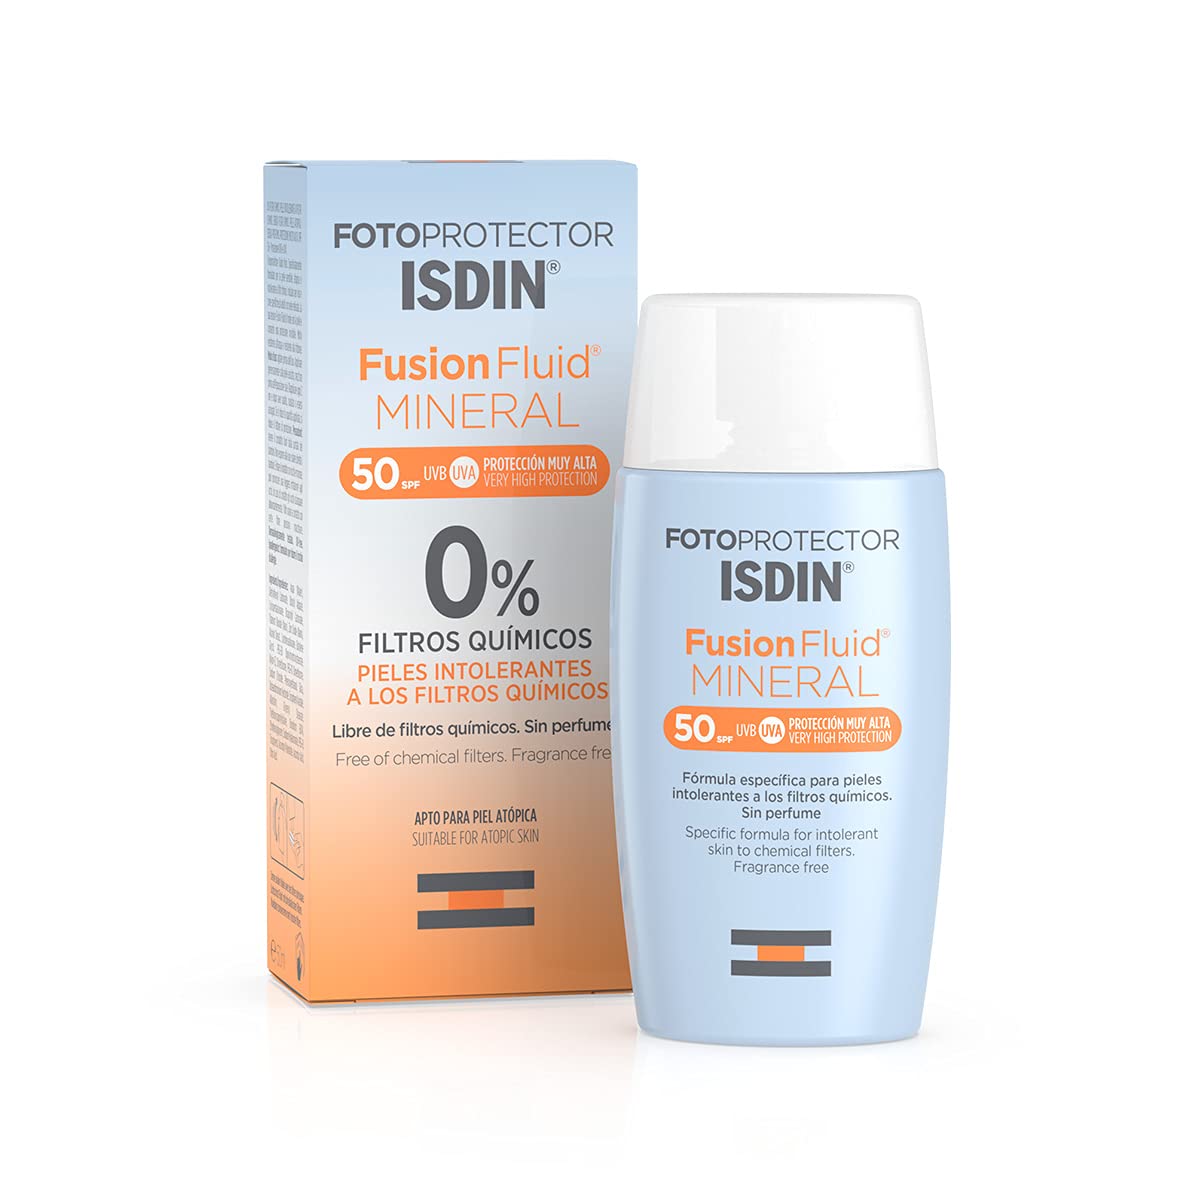 Sunscreen ISDIN Fusion Fluid Mineral SPF 50 - 100% Mineral Facial Sunscreen for Intolant Skin, 50 ml